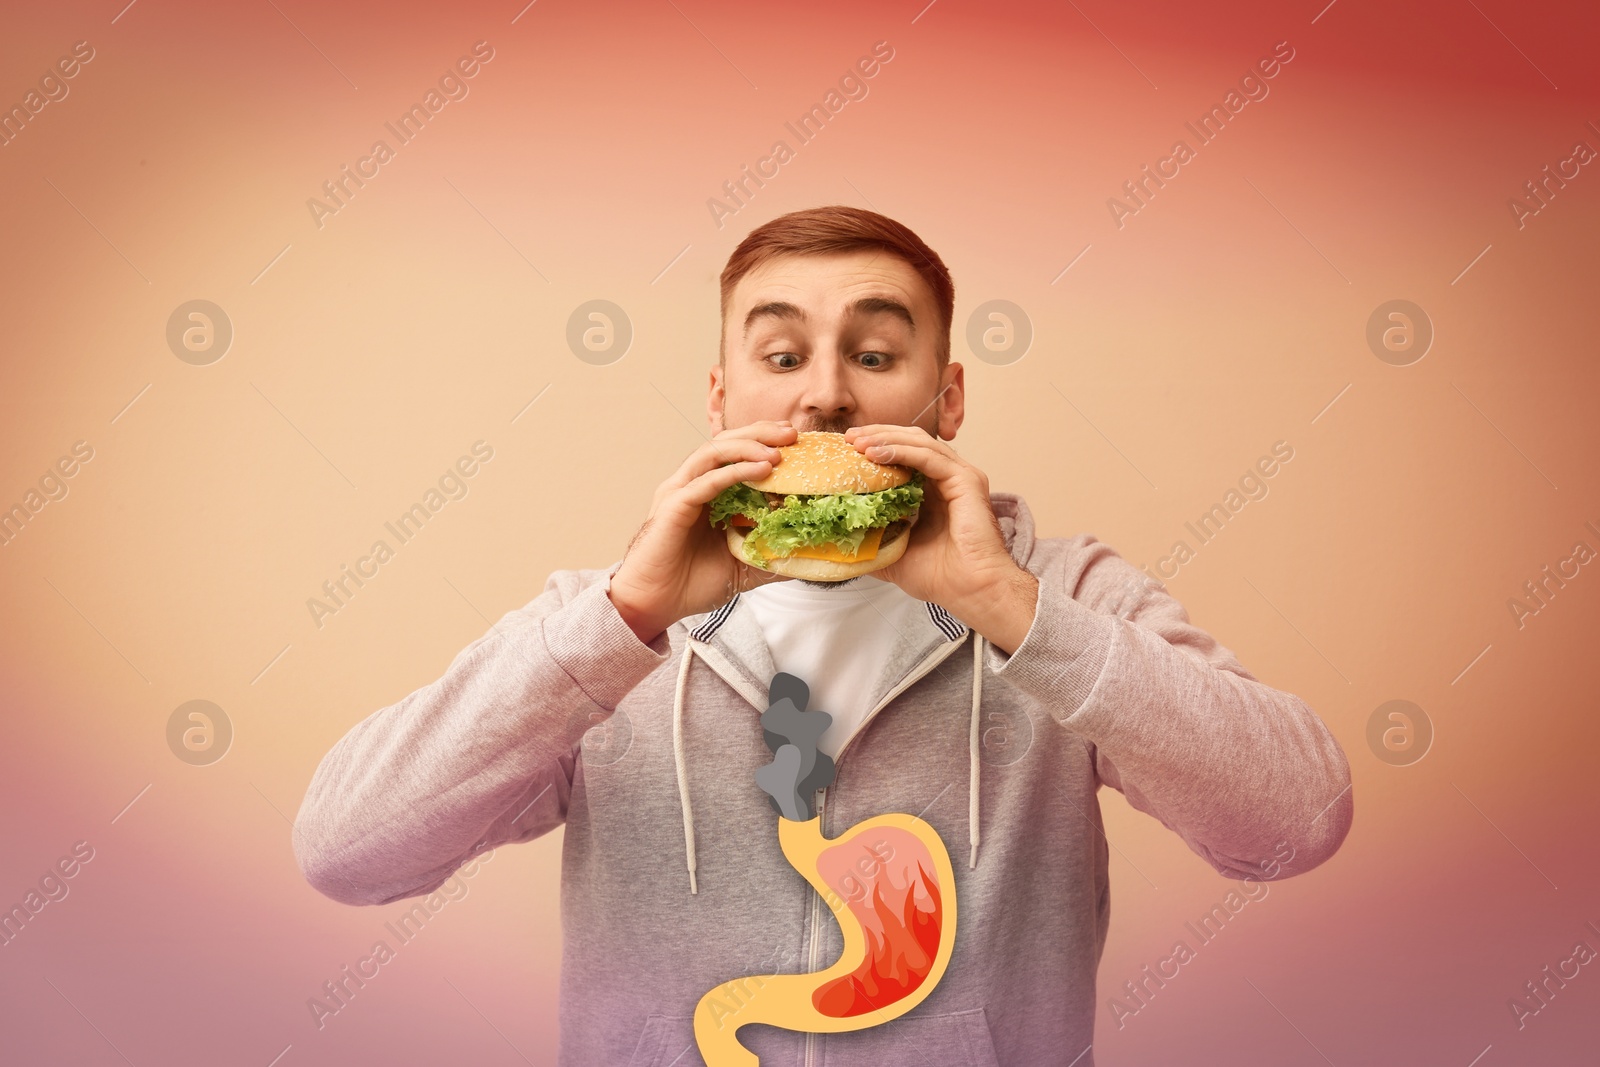 Image of Improper nutrition can lead to heartburn or other gastrointestinal problems. Man eating burger on color background. Illustration of stomach with fire and smoke as acid indigestion